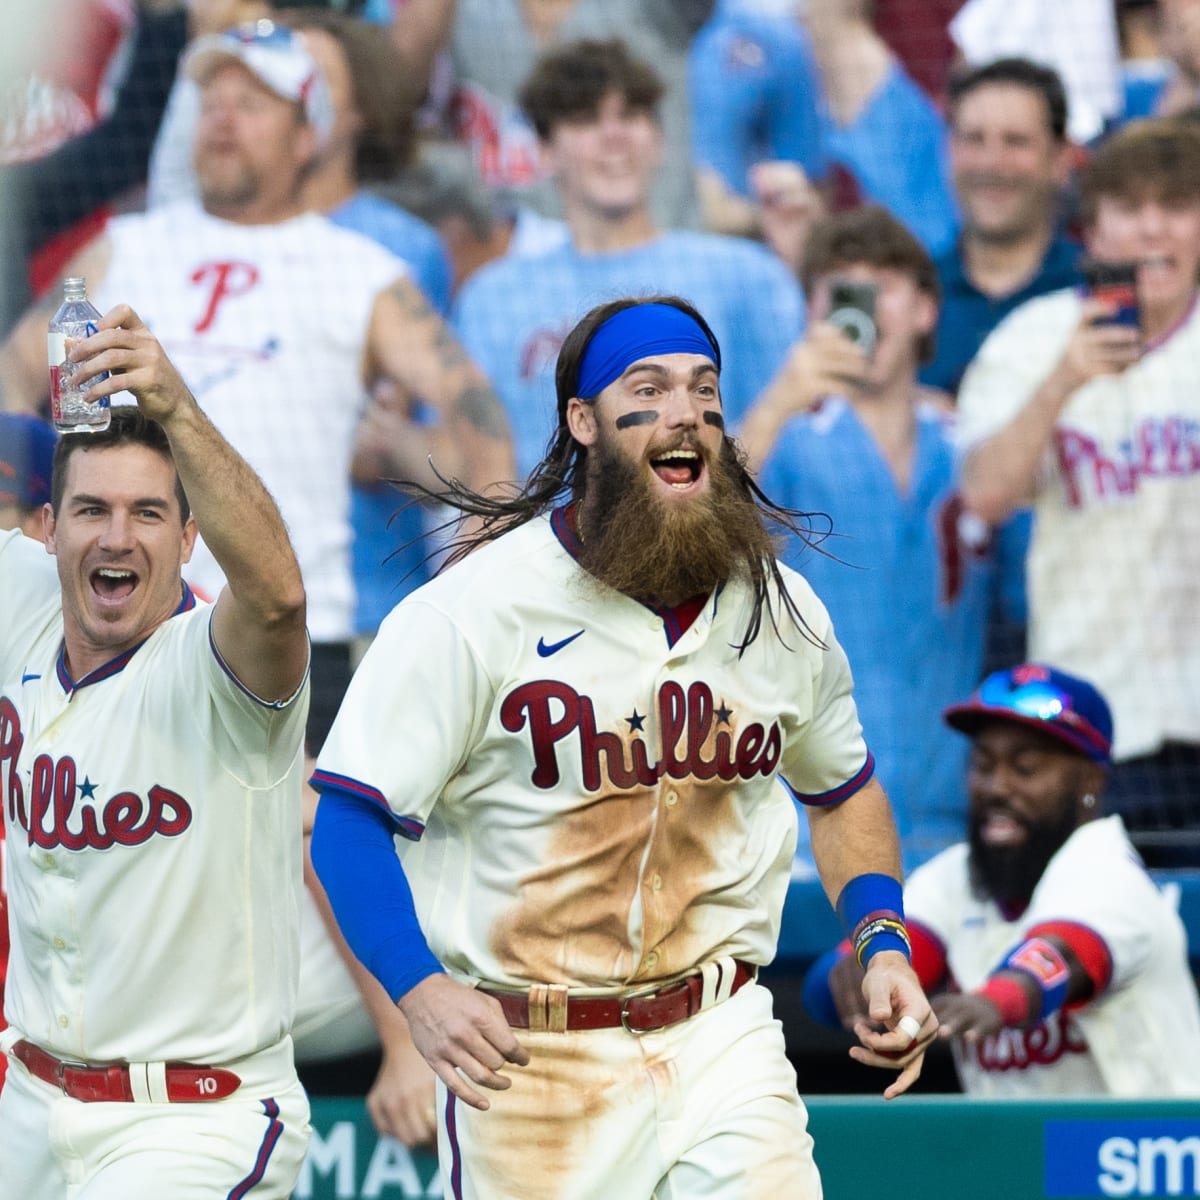 Mets at Phillies Free Live Stream MLB Online, Channel - How to Watch and Stream Major League and College Sports